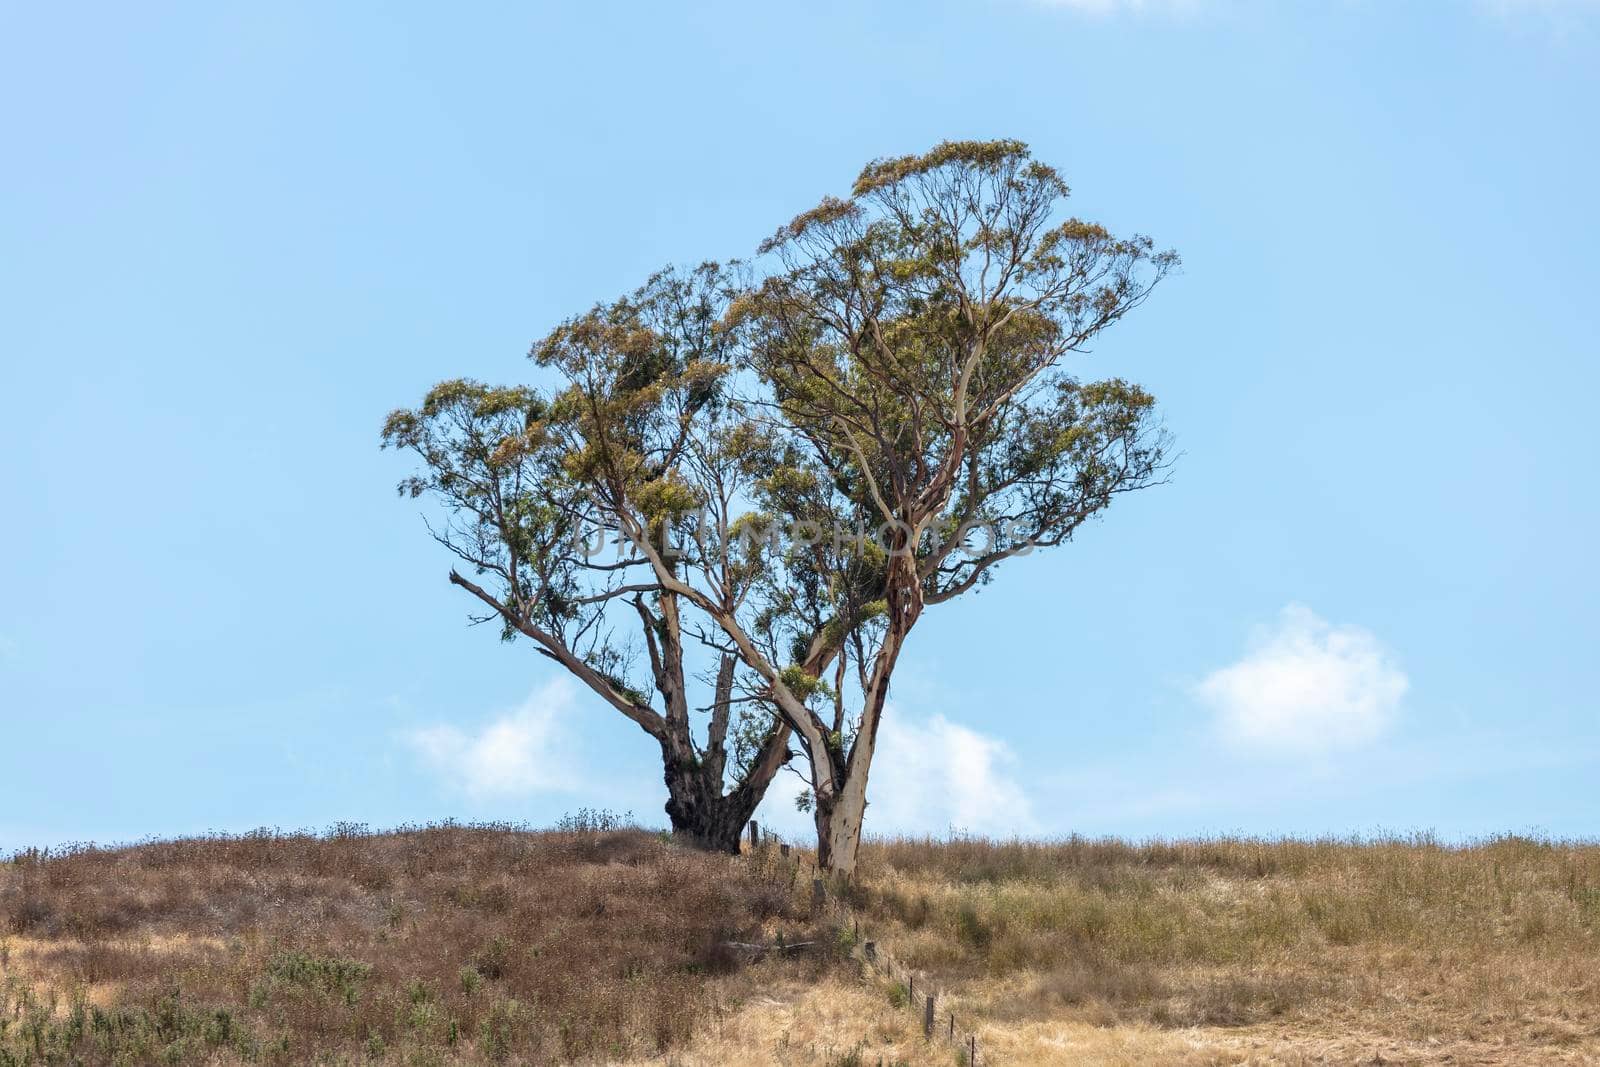 A large gum tree standing on a dry hill near a fence line